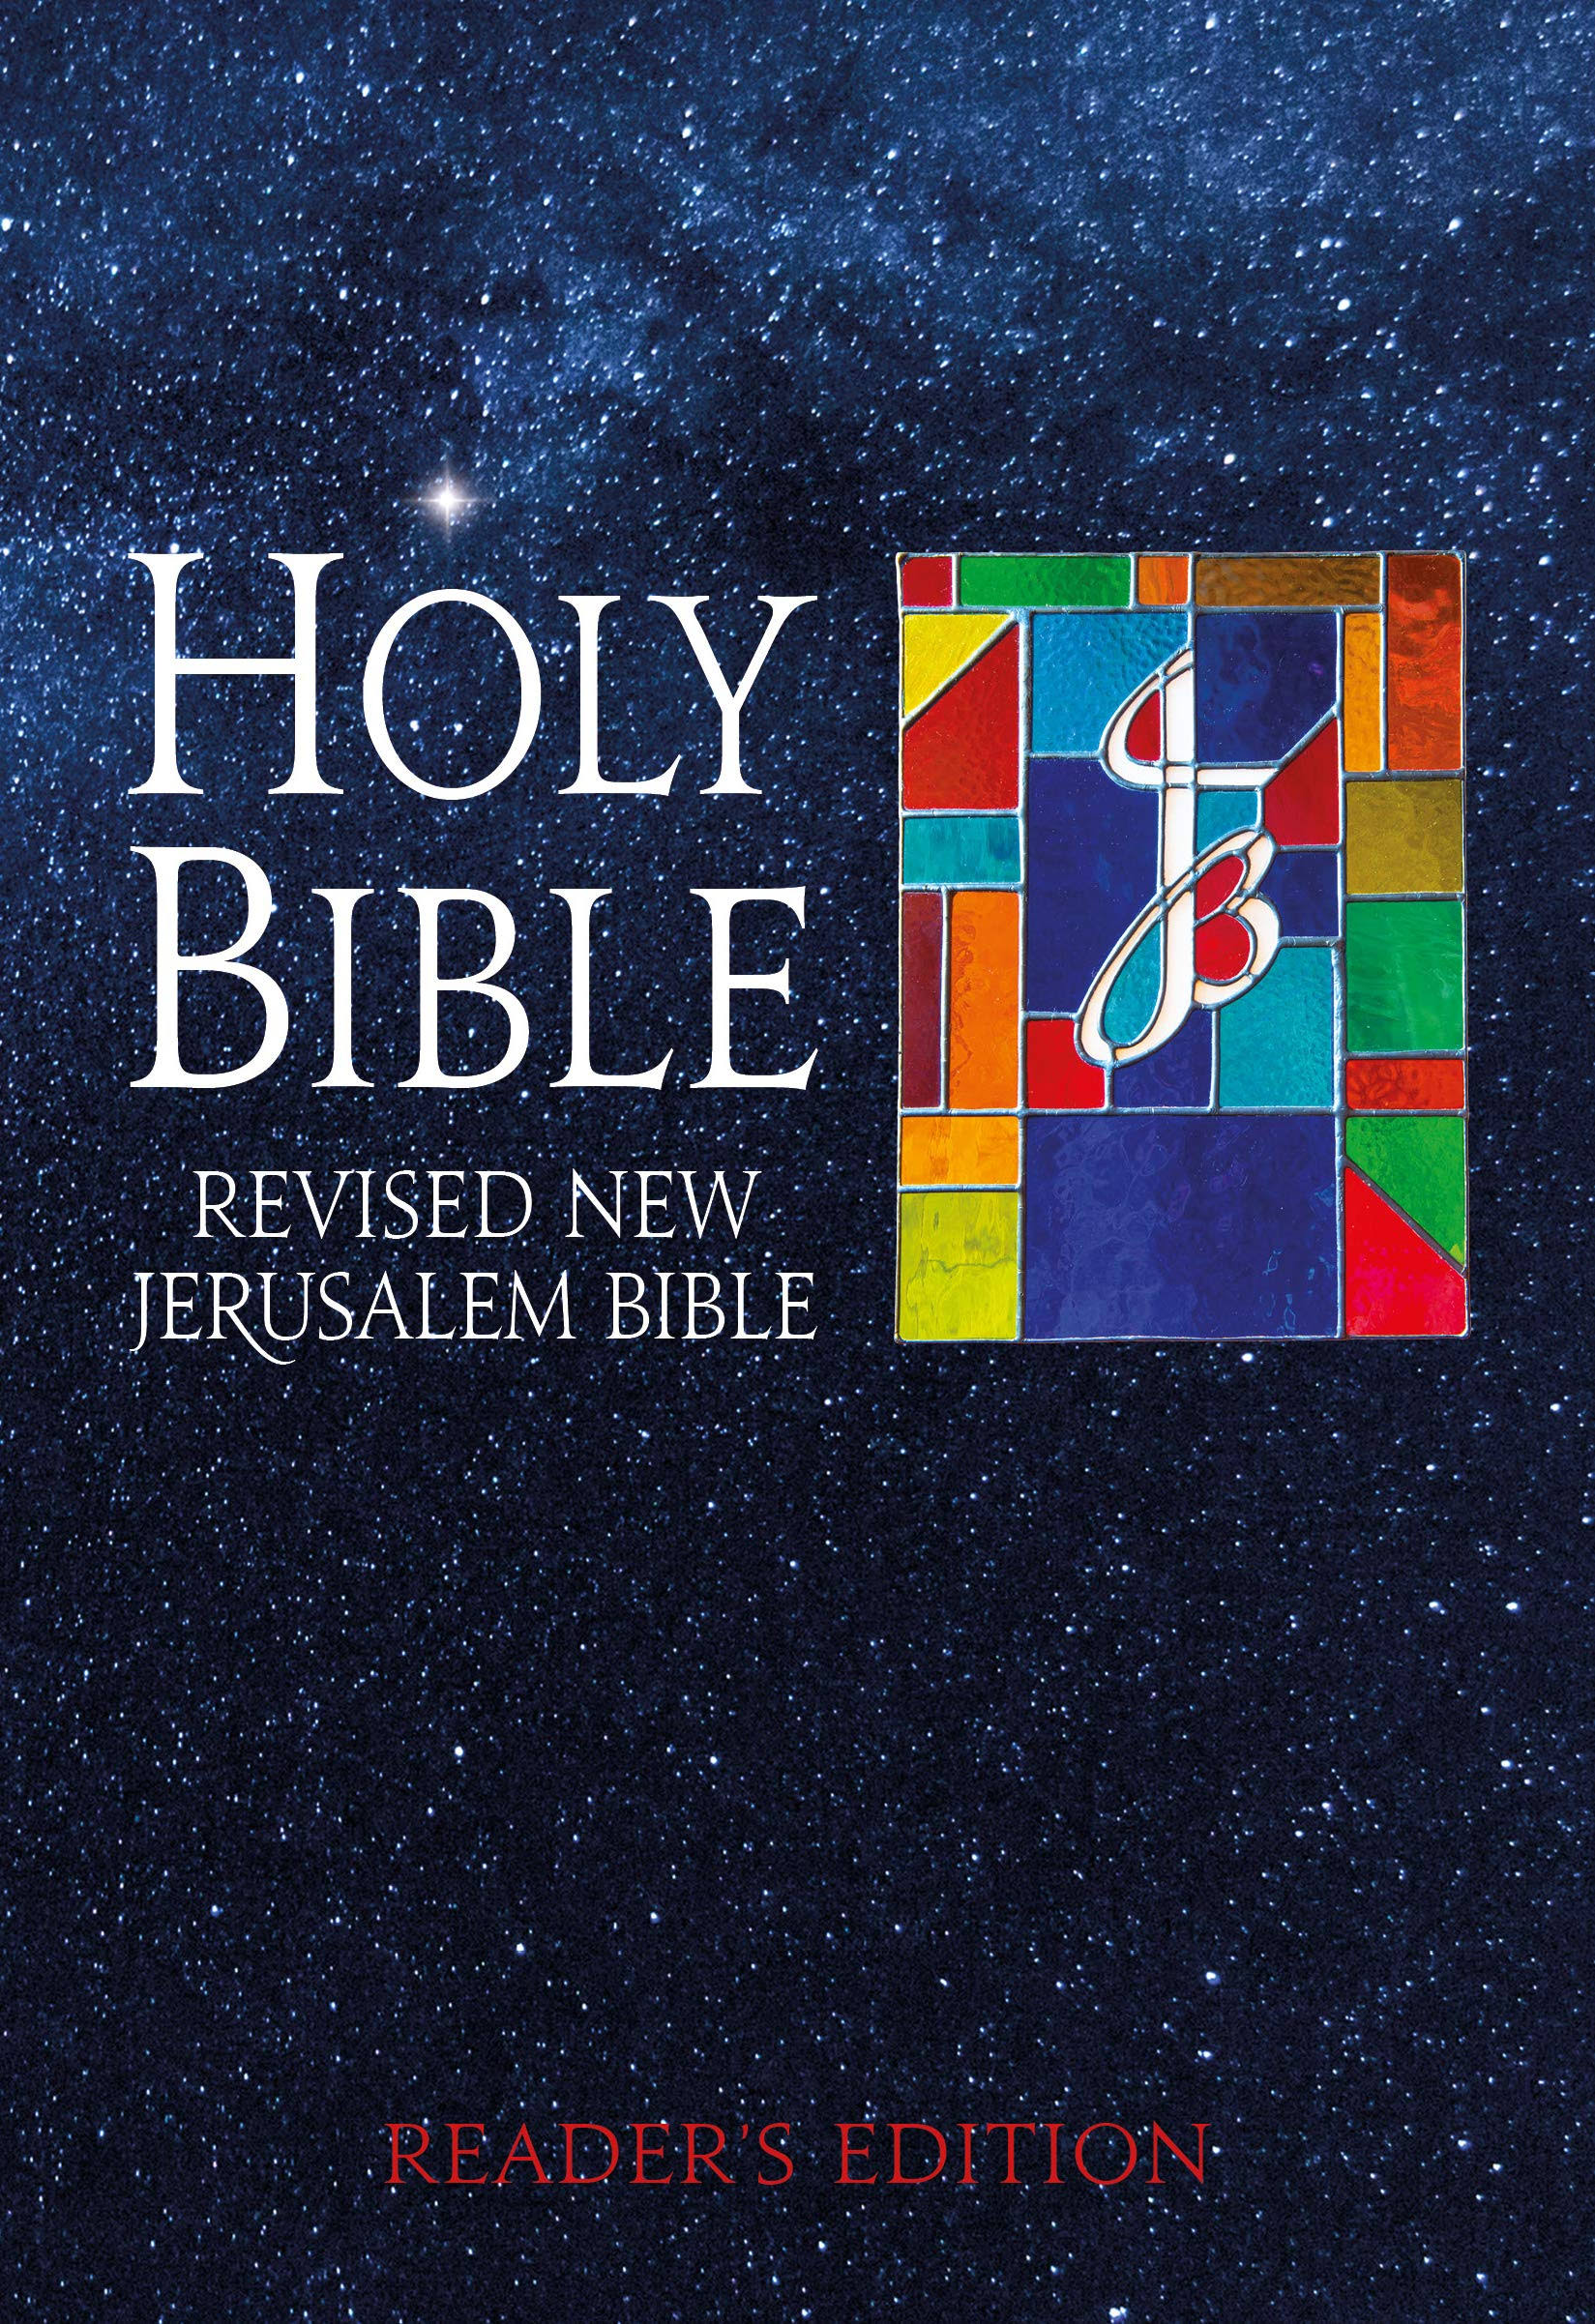 The Revised New Jerusalem Bible: Reader's Edition - NIGHT [Book]